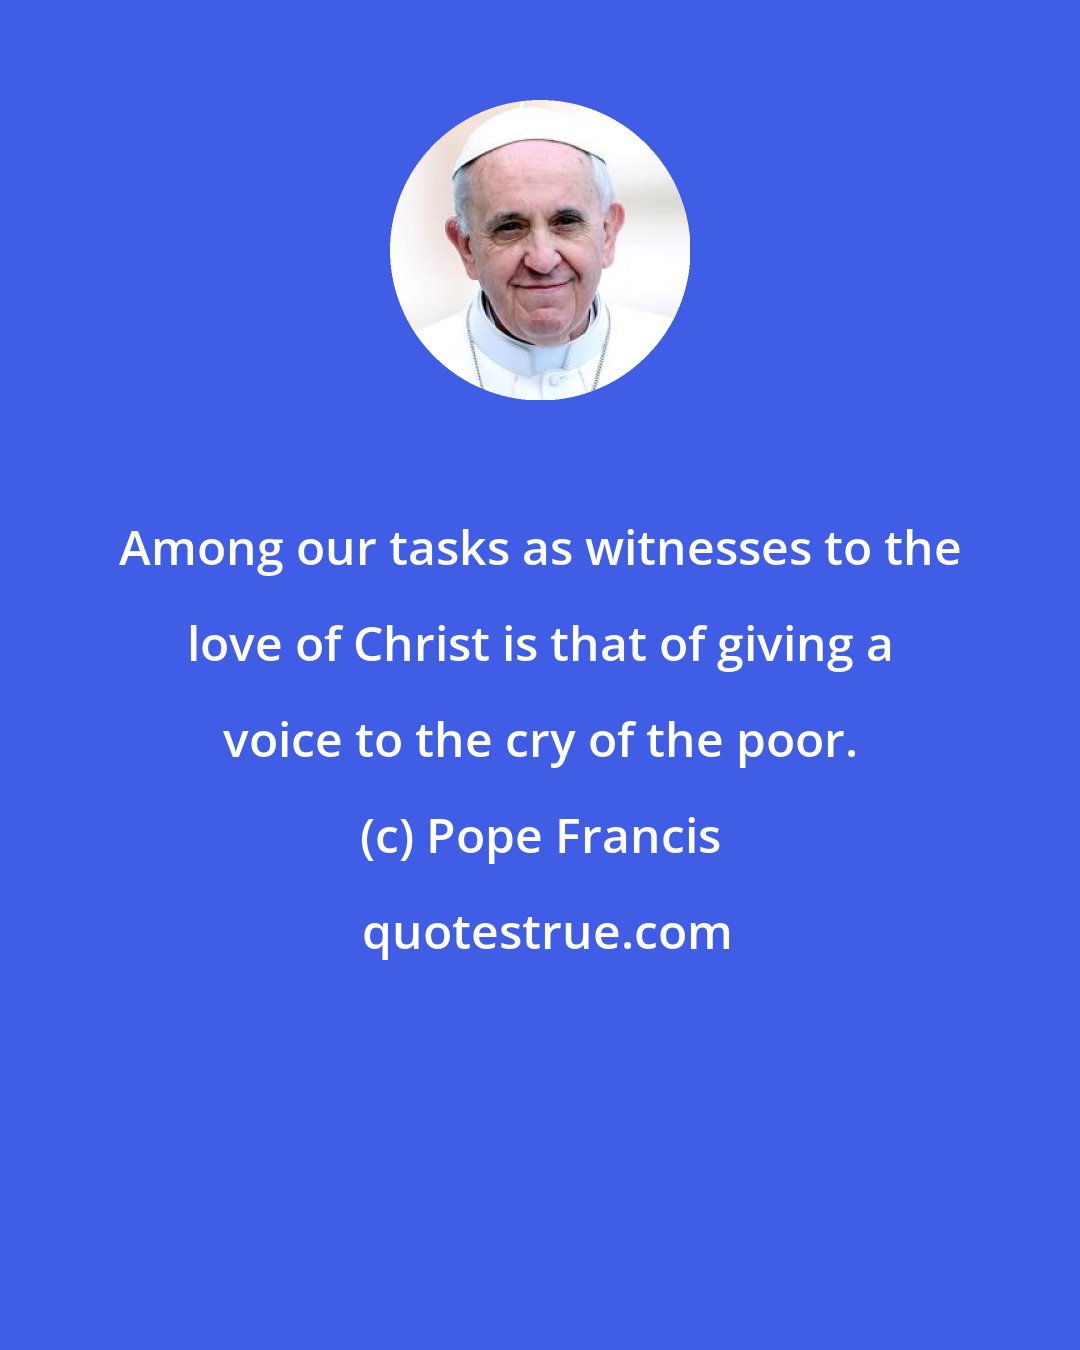 Pope Francis: Among our tasks as witnesses to the love of Christ is that of giving a voice to the cry of the poor.